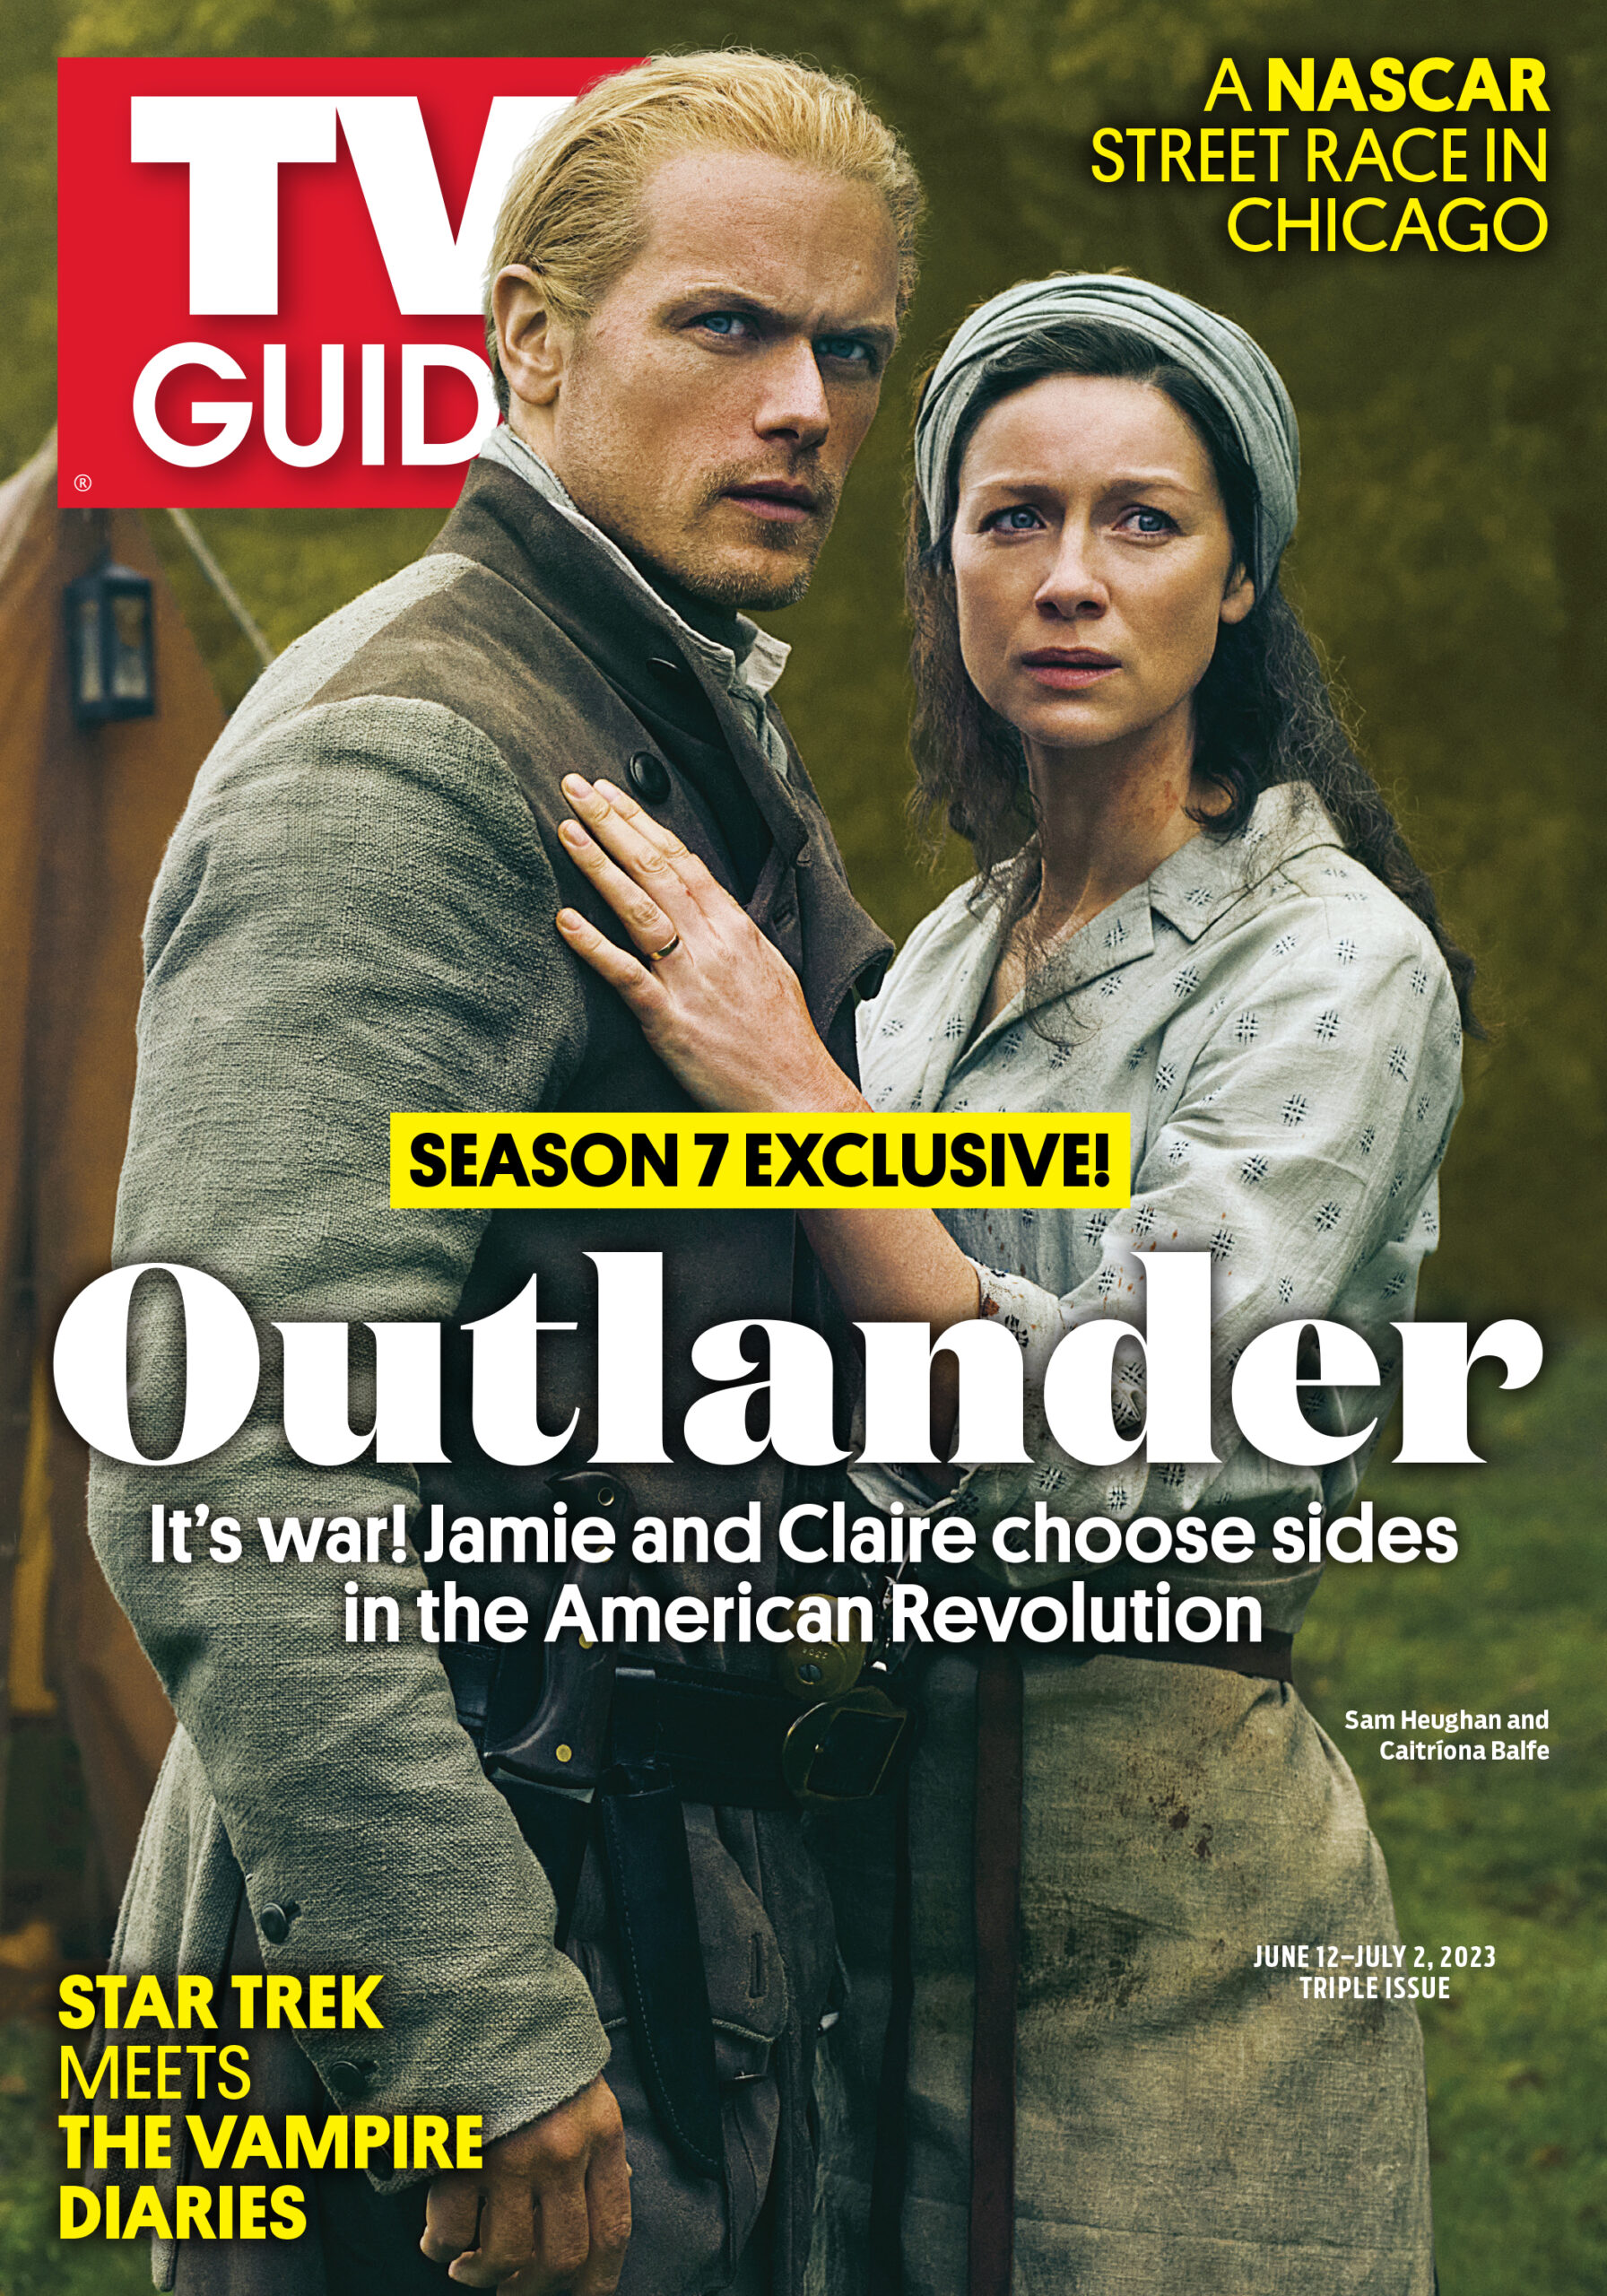 A NASCAR RACE IN CHICAGO; SEASON 7 EXCLUSIVE! OUTLANDER: It's war! Jamie and Claire choose sifes in the American Revolution; STAR TREAK MEETS THE VAMPIRE DIARIES